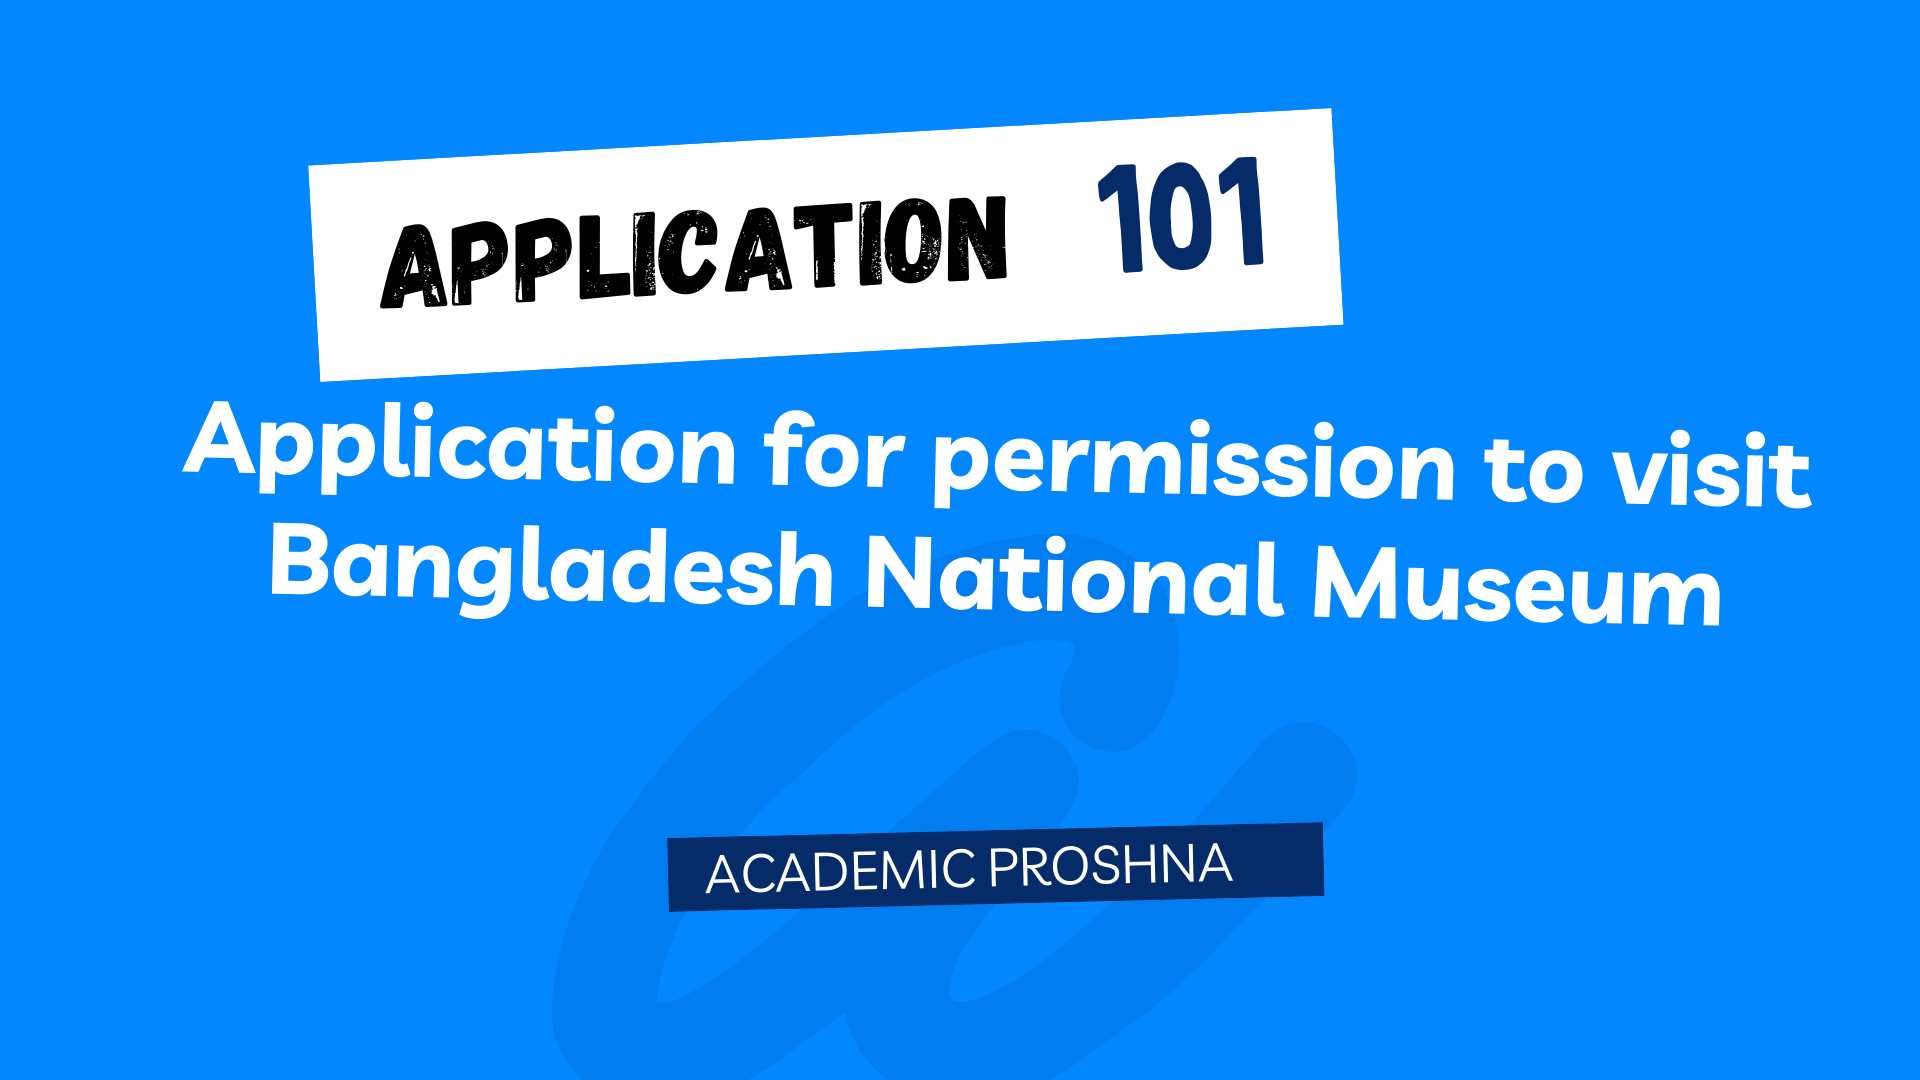 Application for permission to visit Bangladesh National Museum.